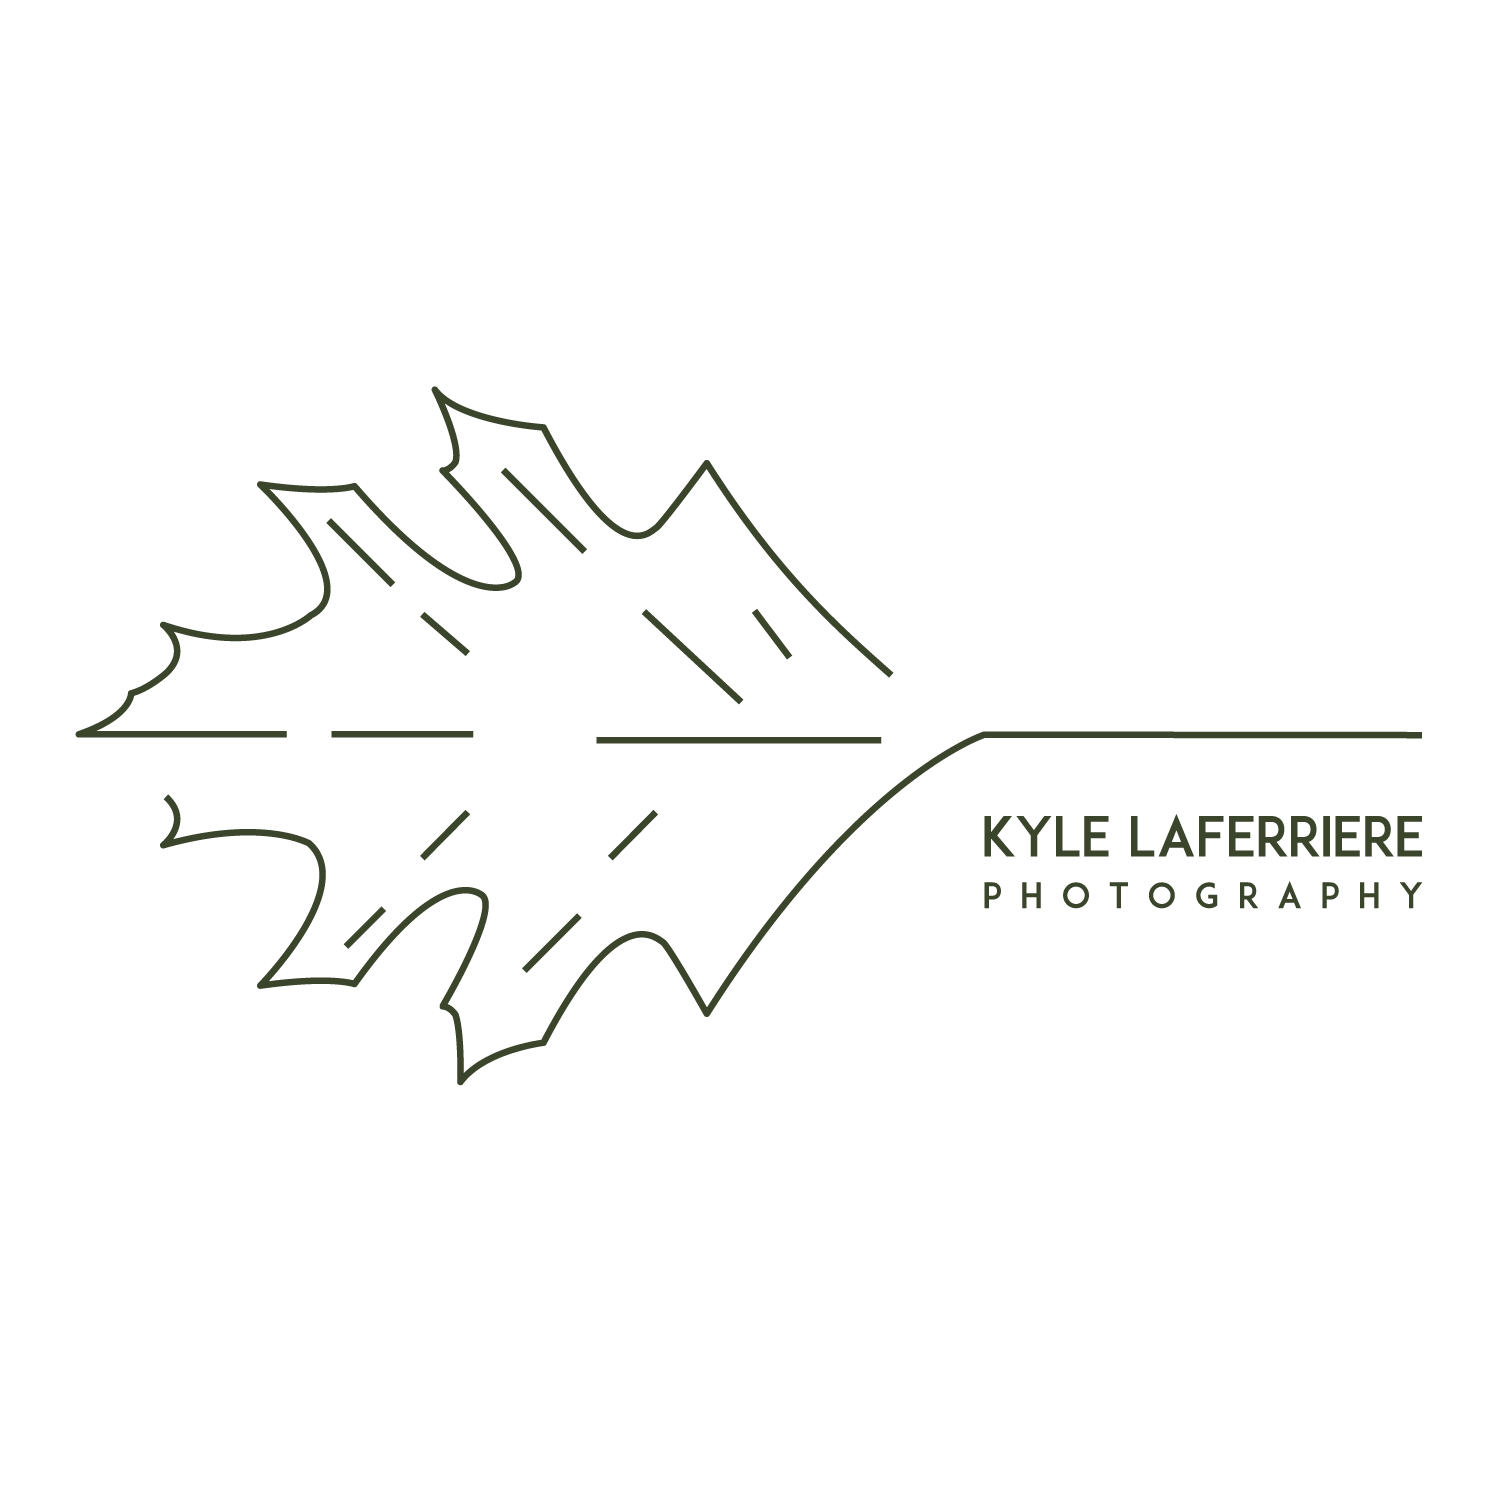 Kyle LaFerriere Photography's Logo